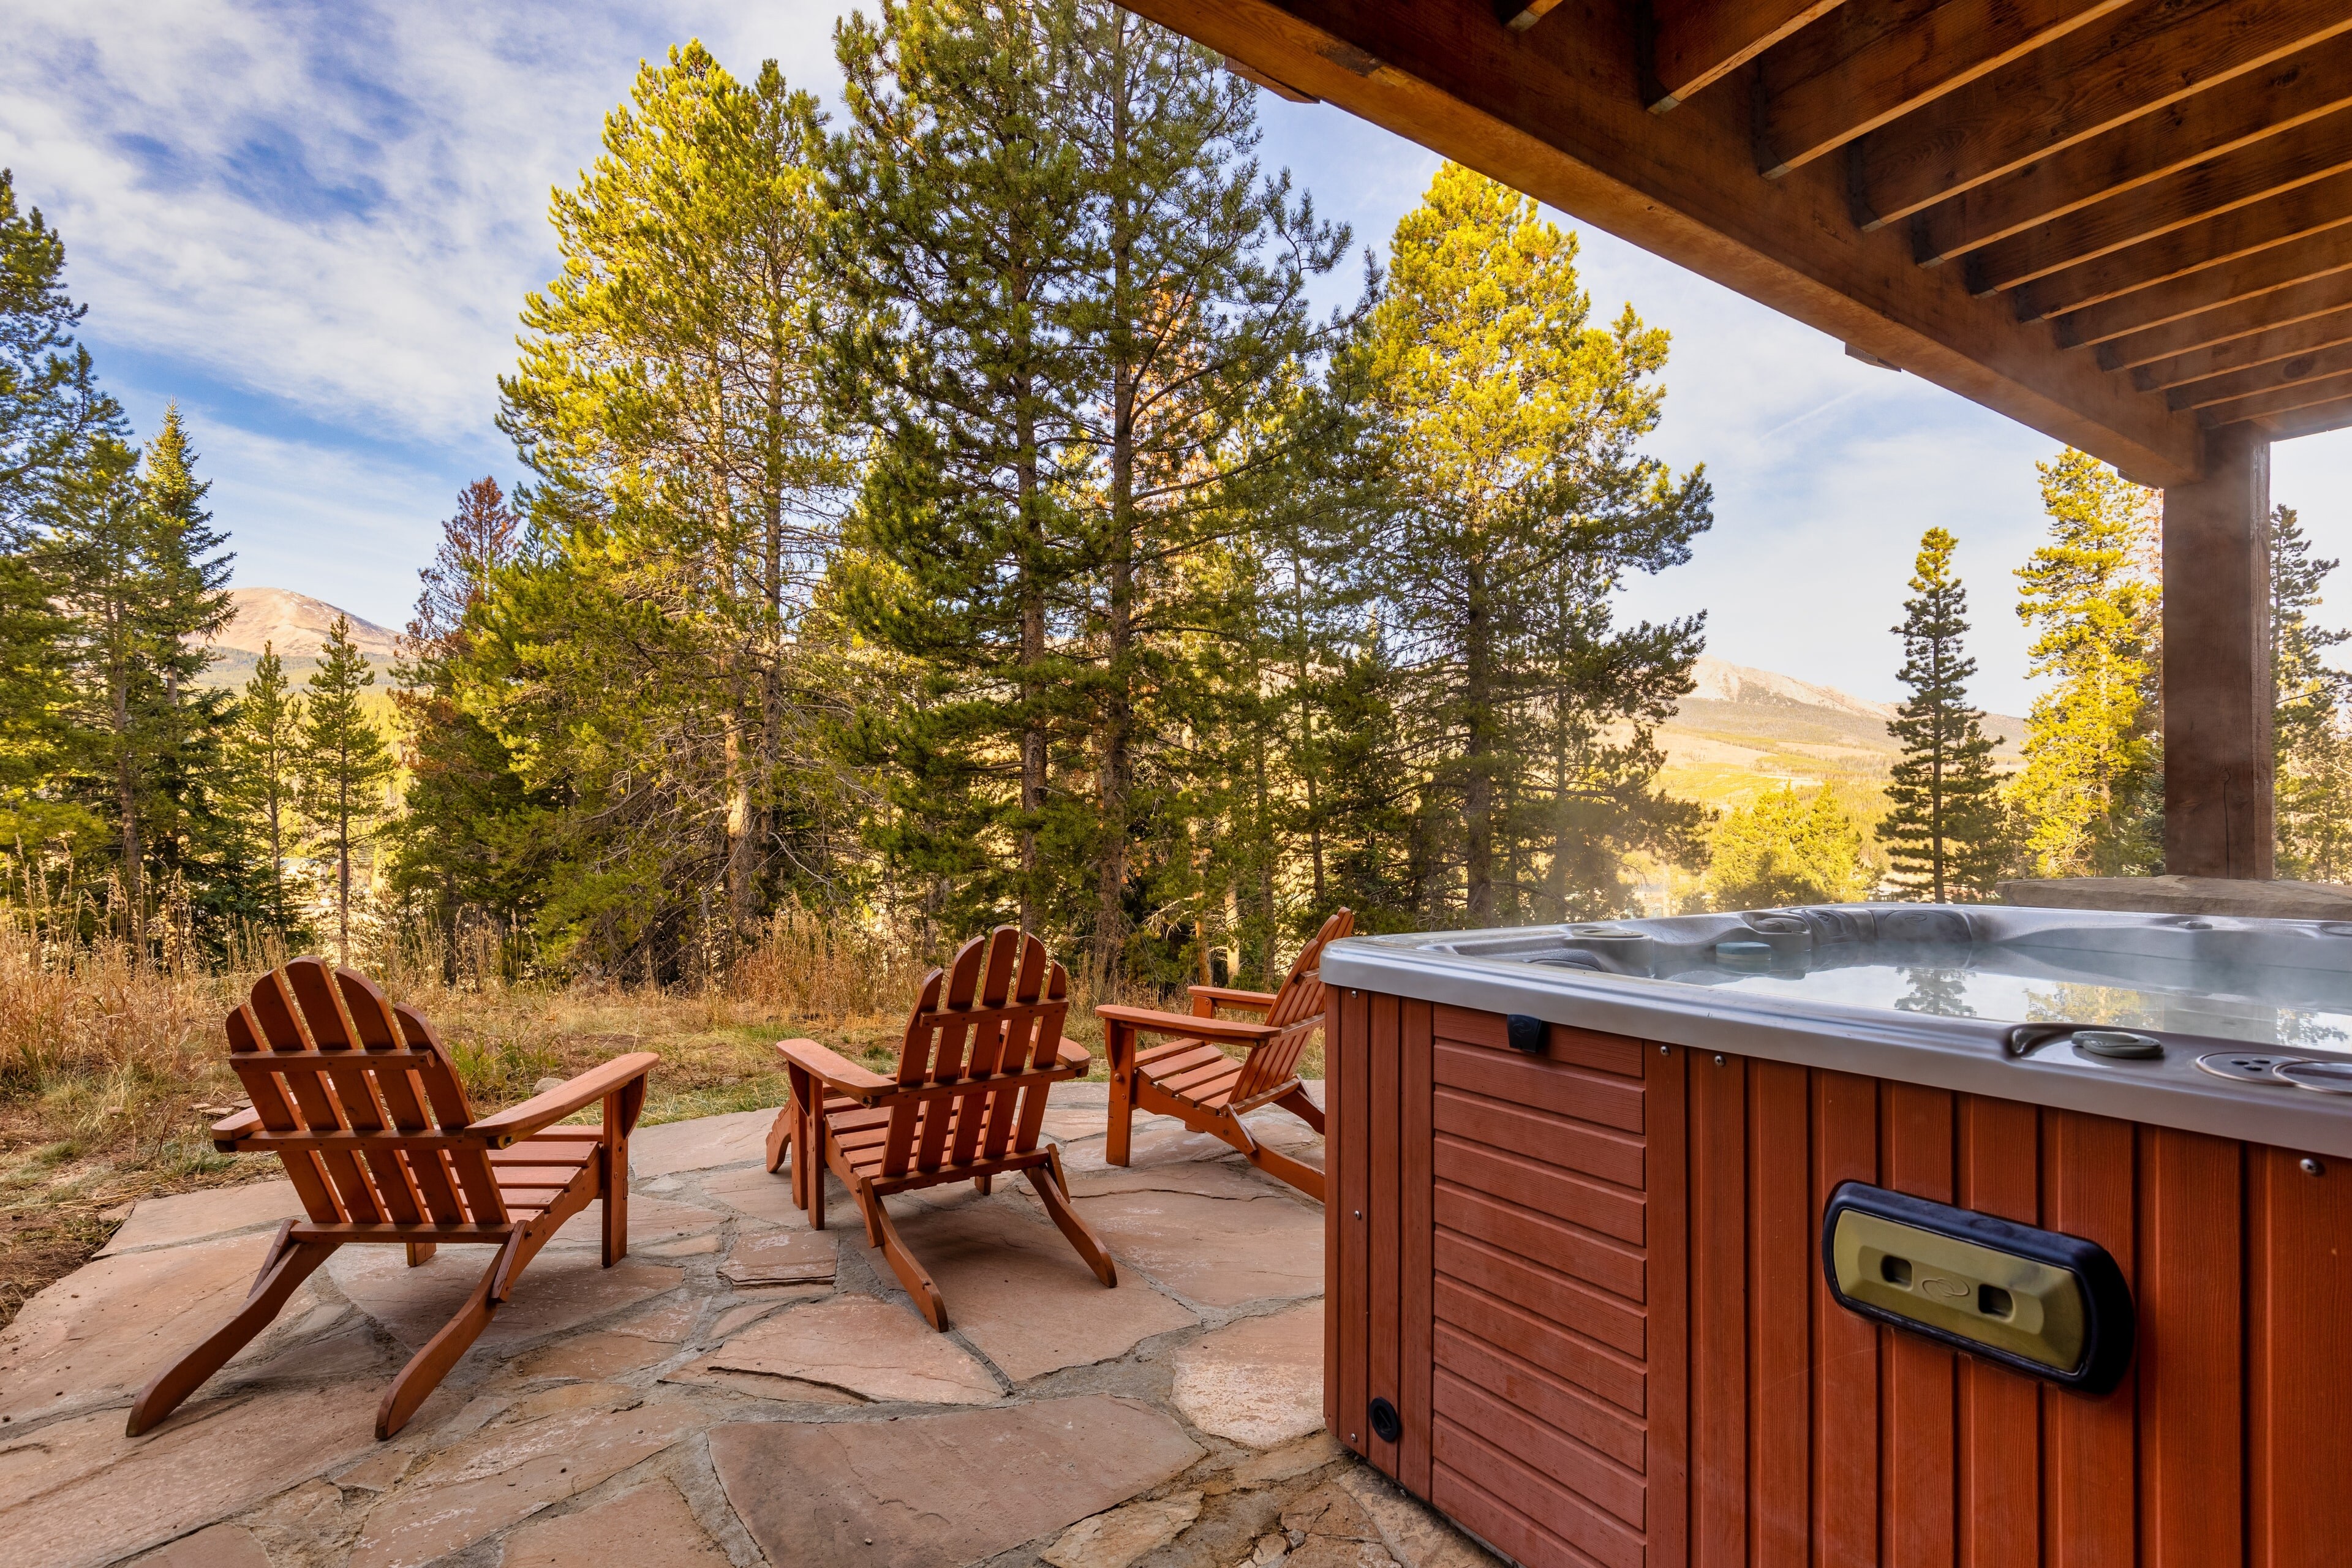 Hot tub, with a view.